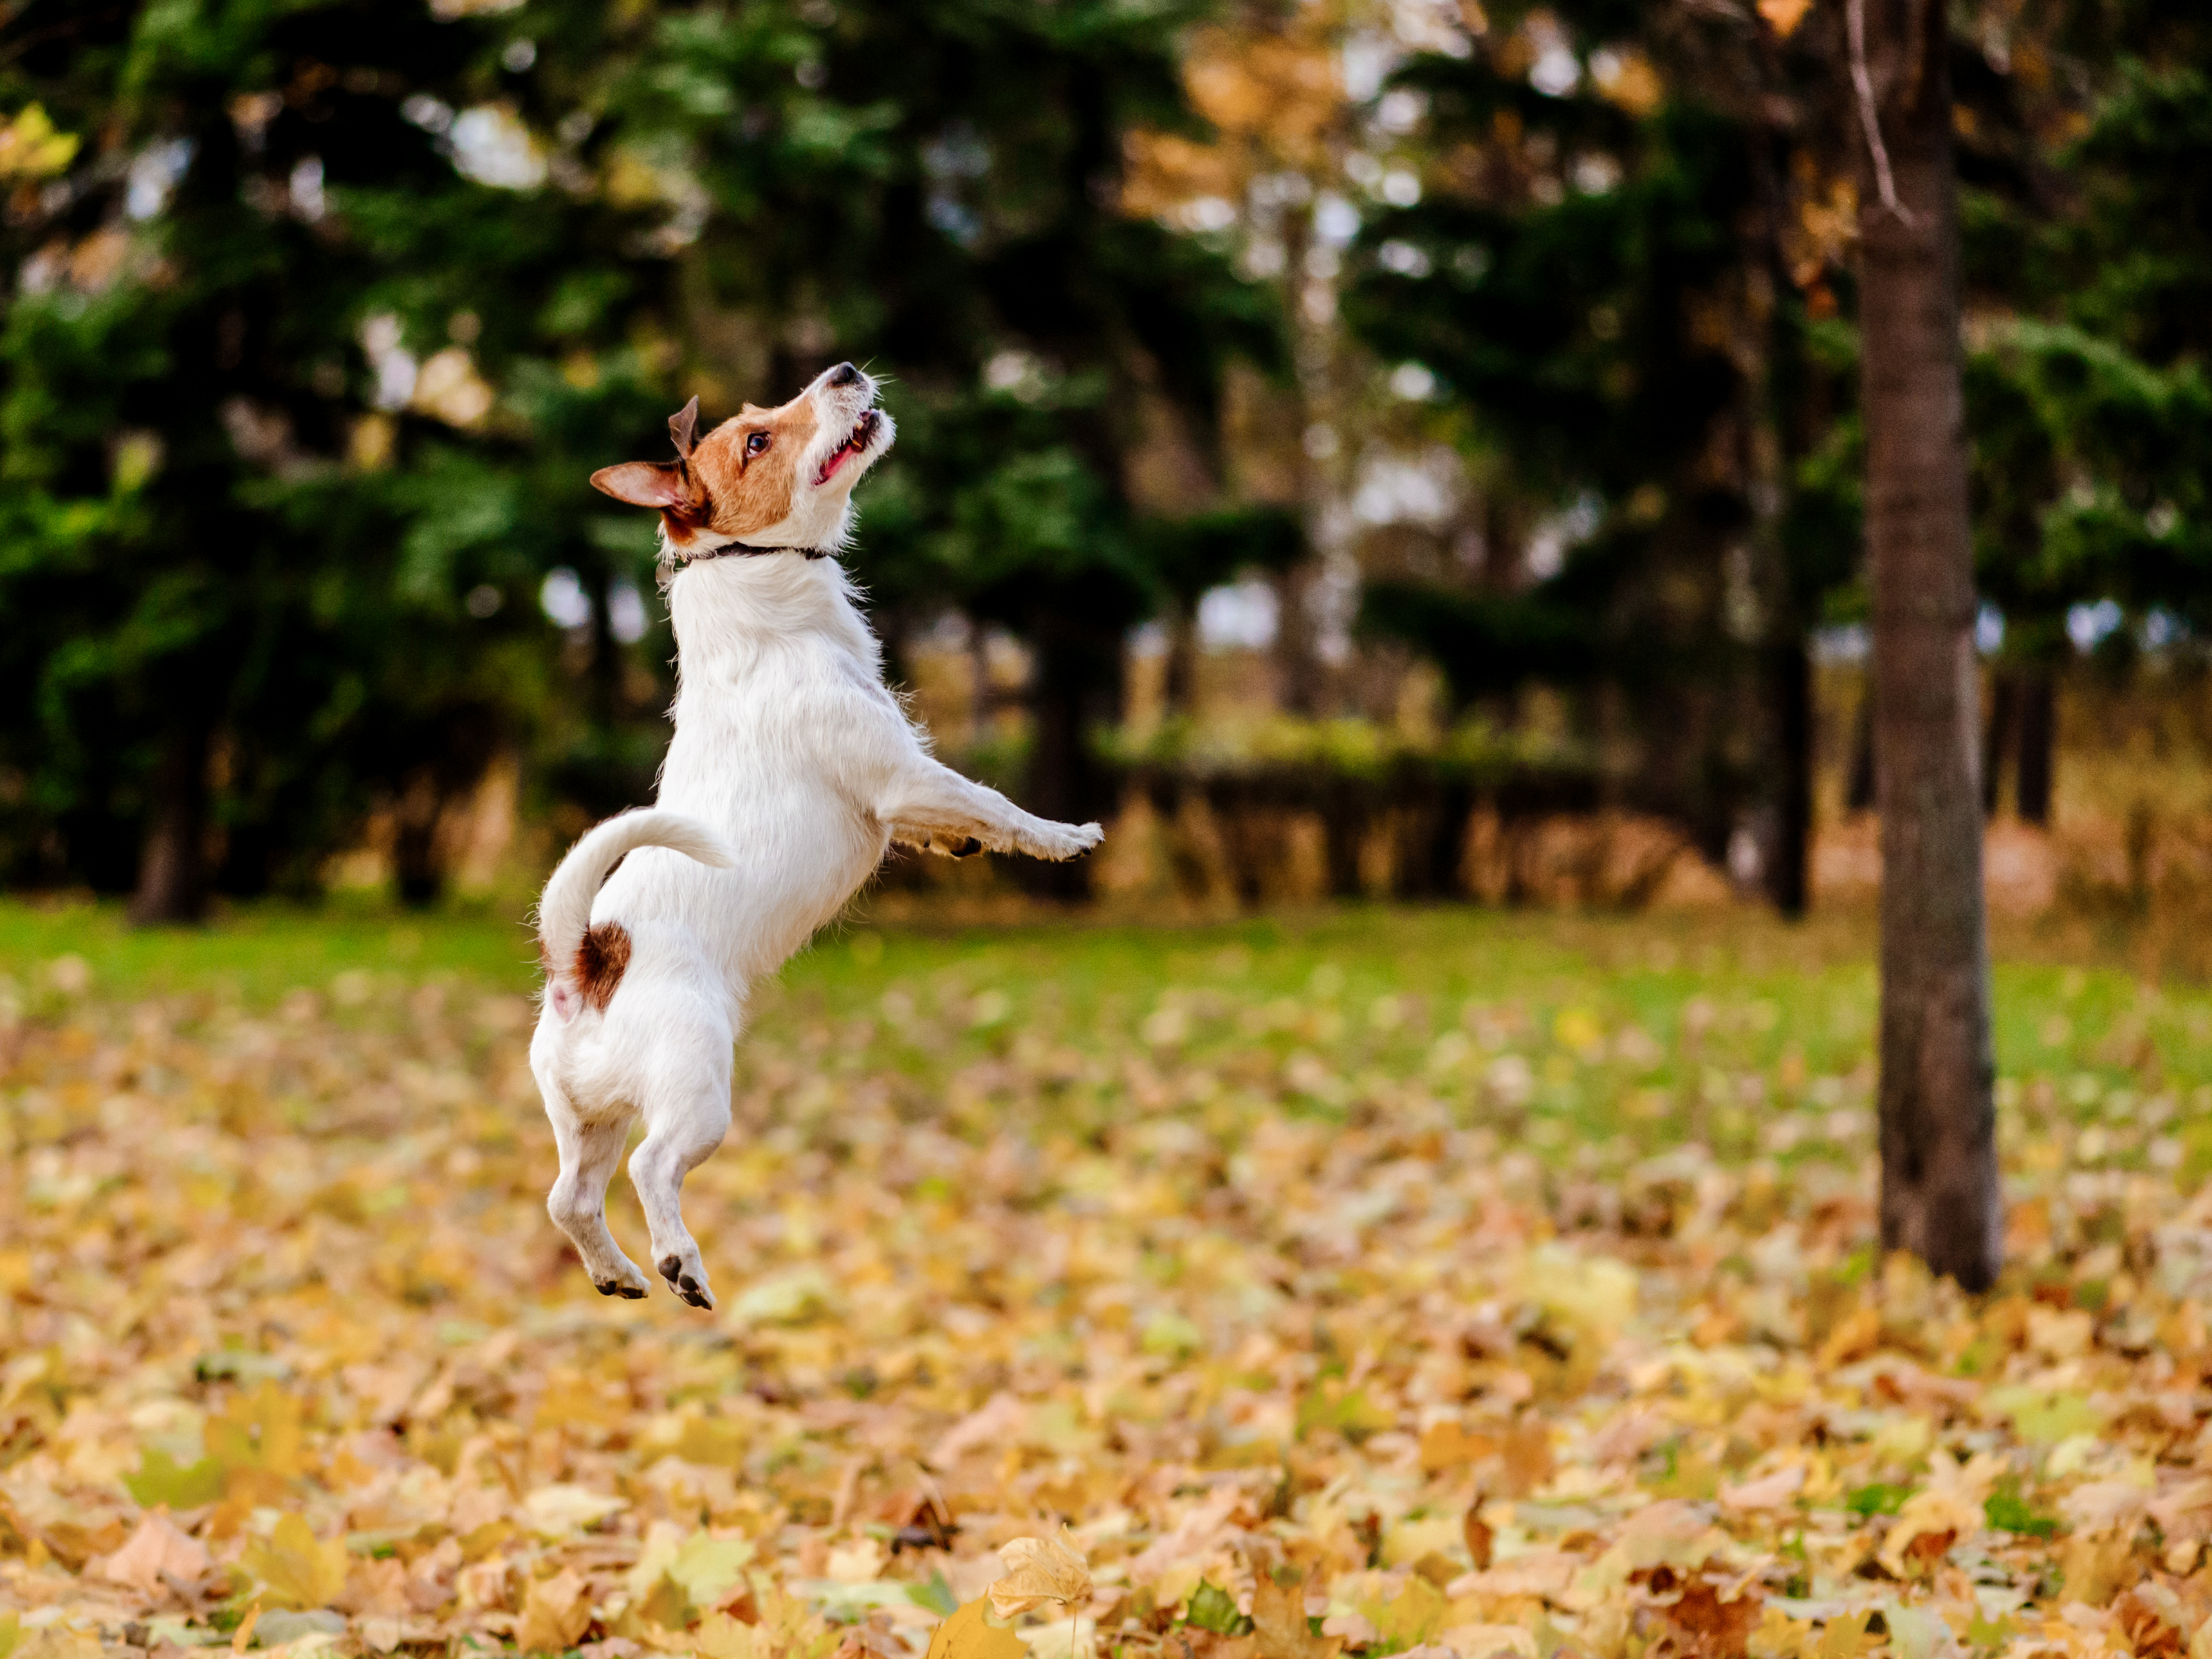 Jack Russell Terrier adult jumping in a park, surrounded by fallen leaves